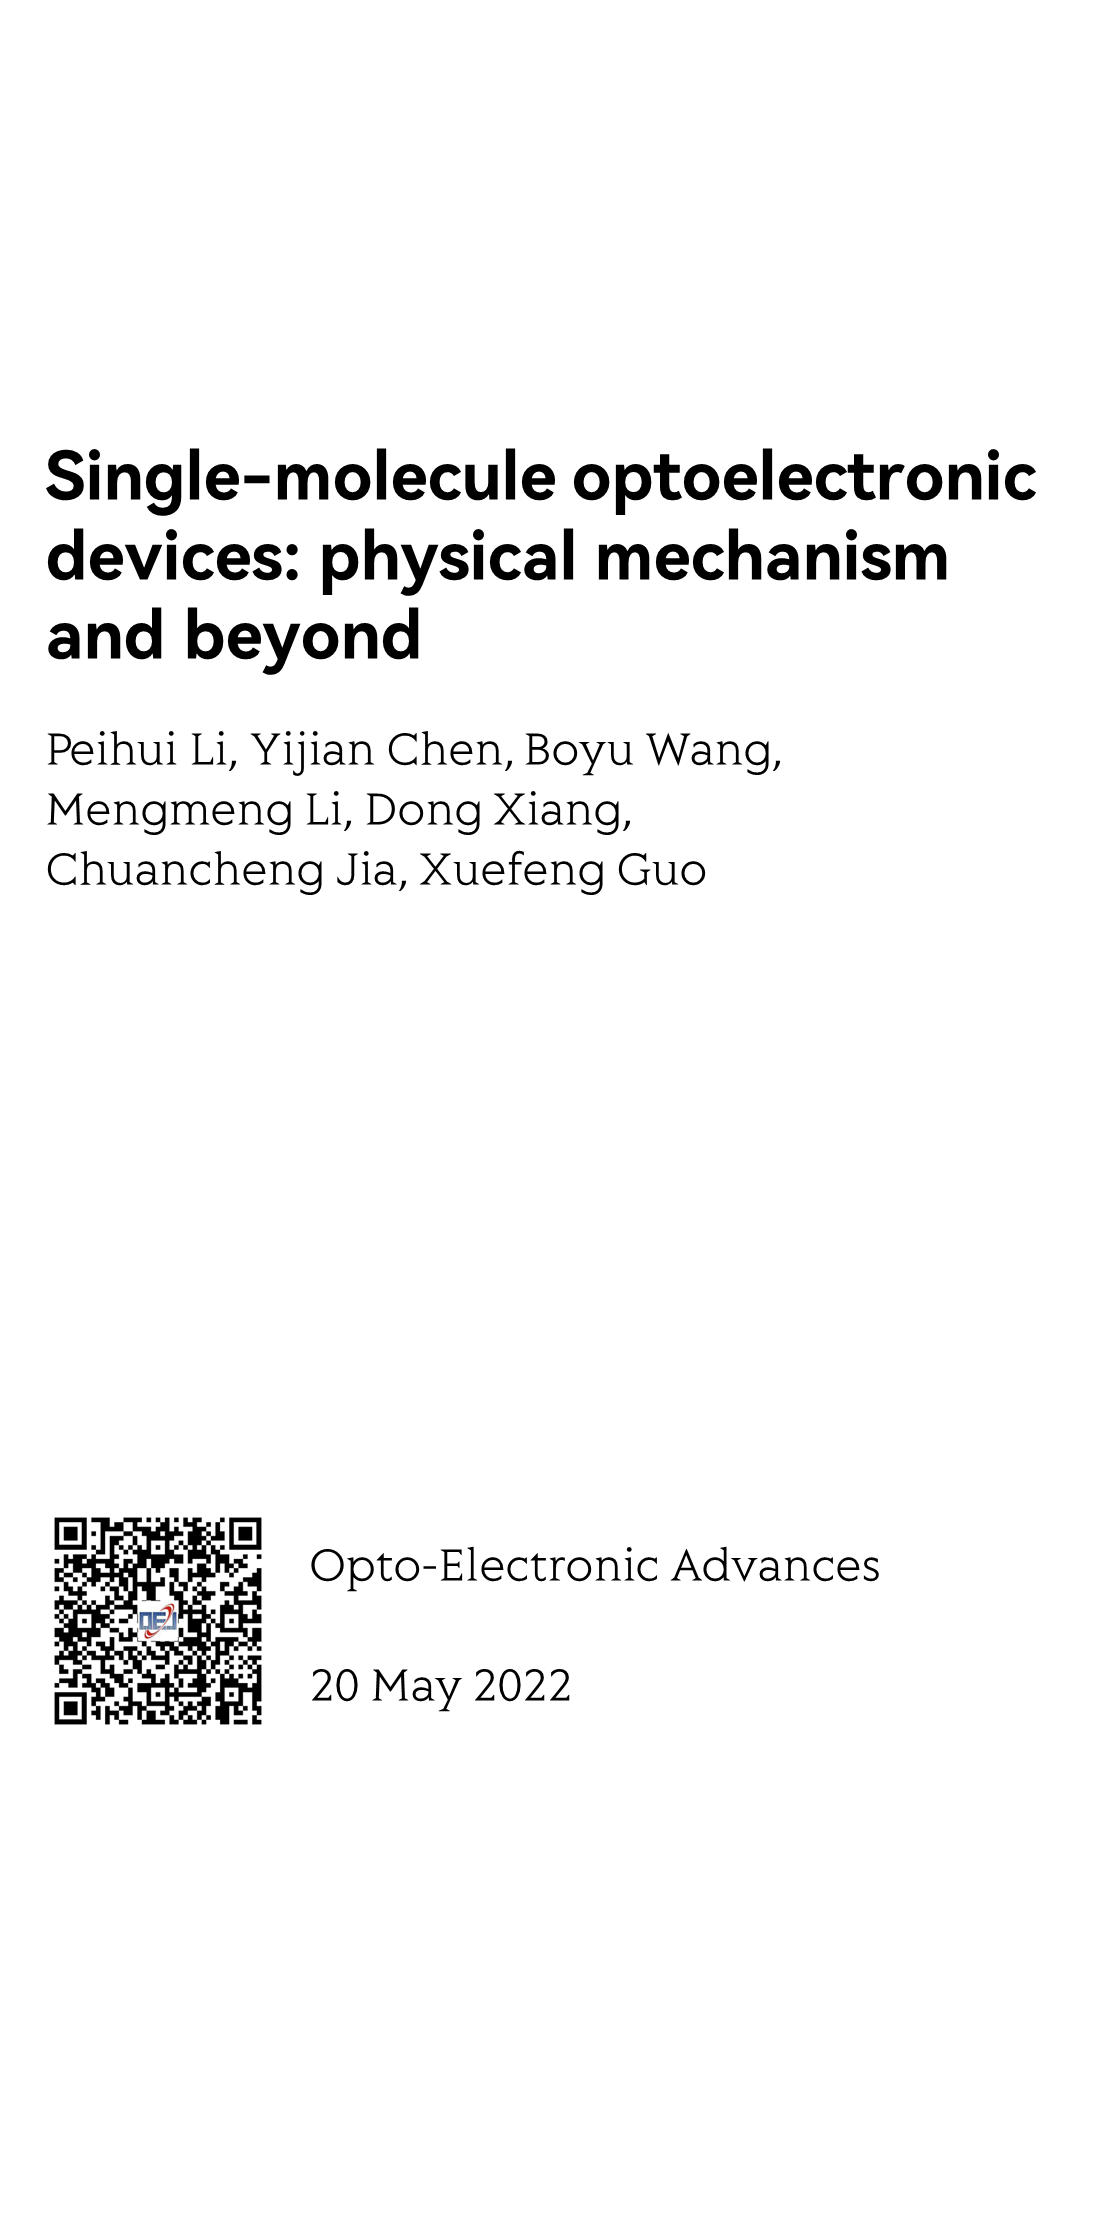 Single-molecule optoelectronic devices: physical mechanism and beyond_1